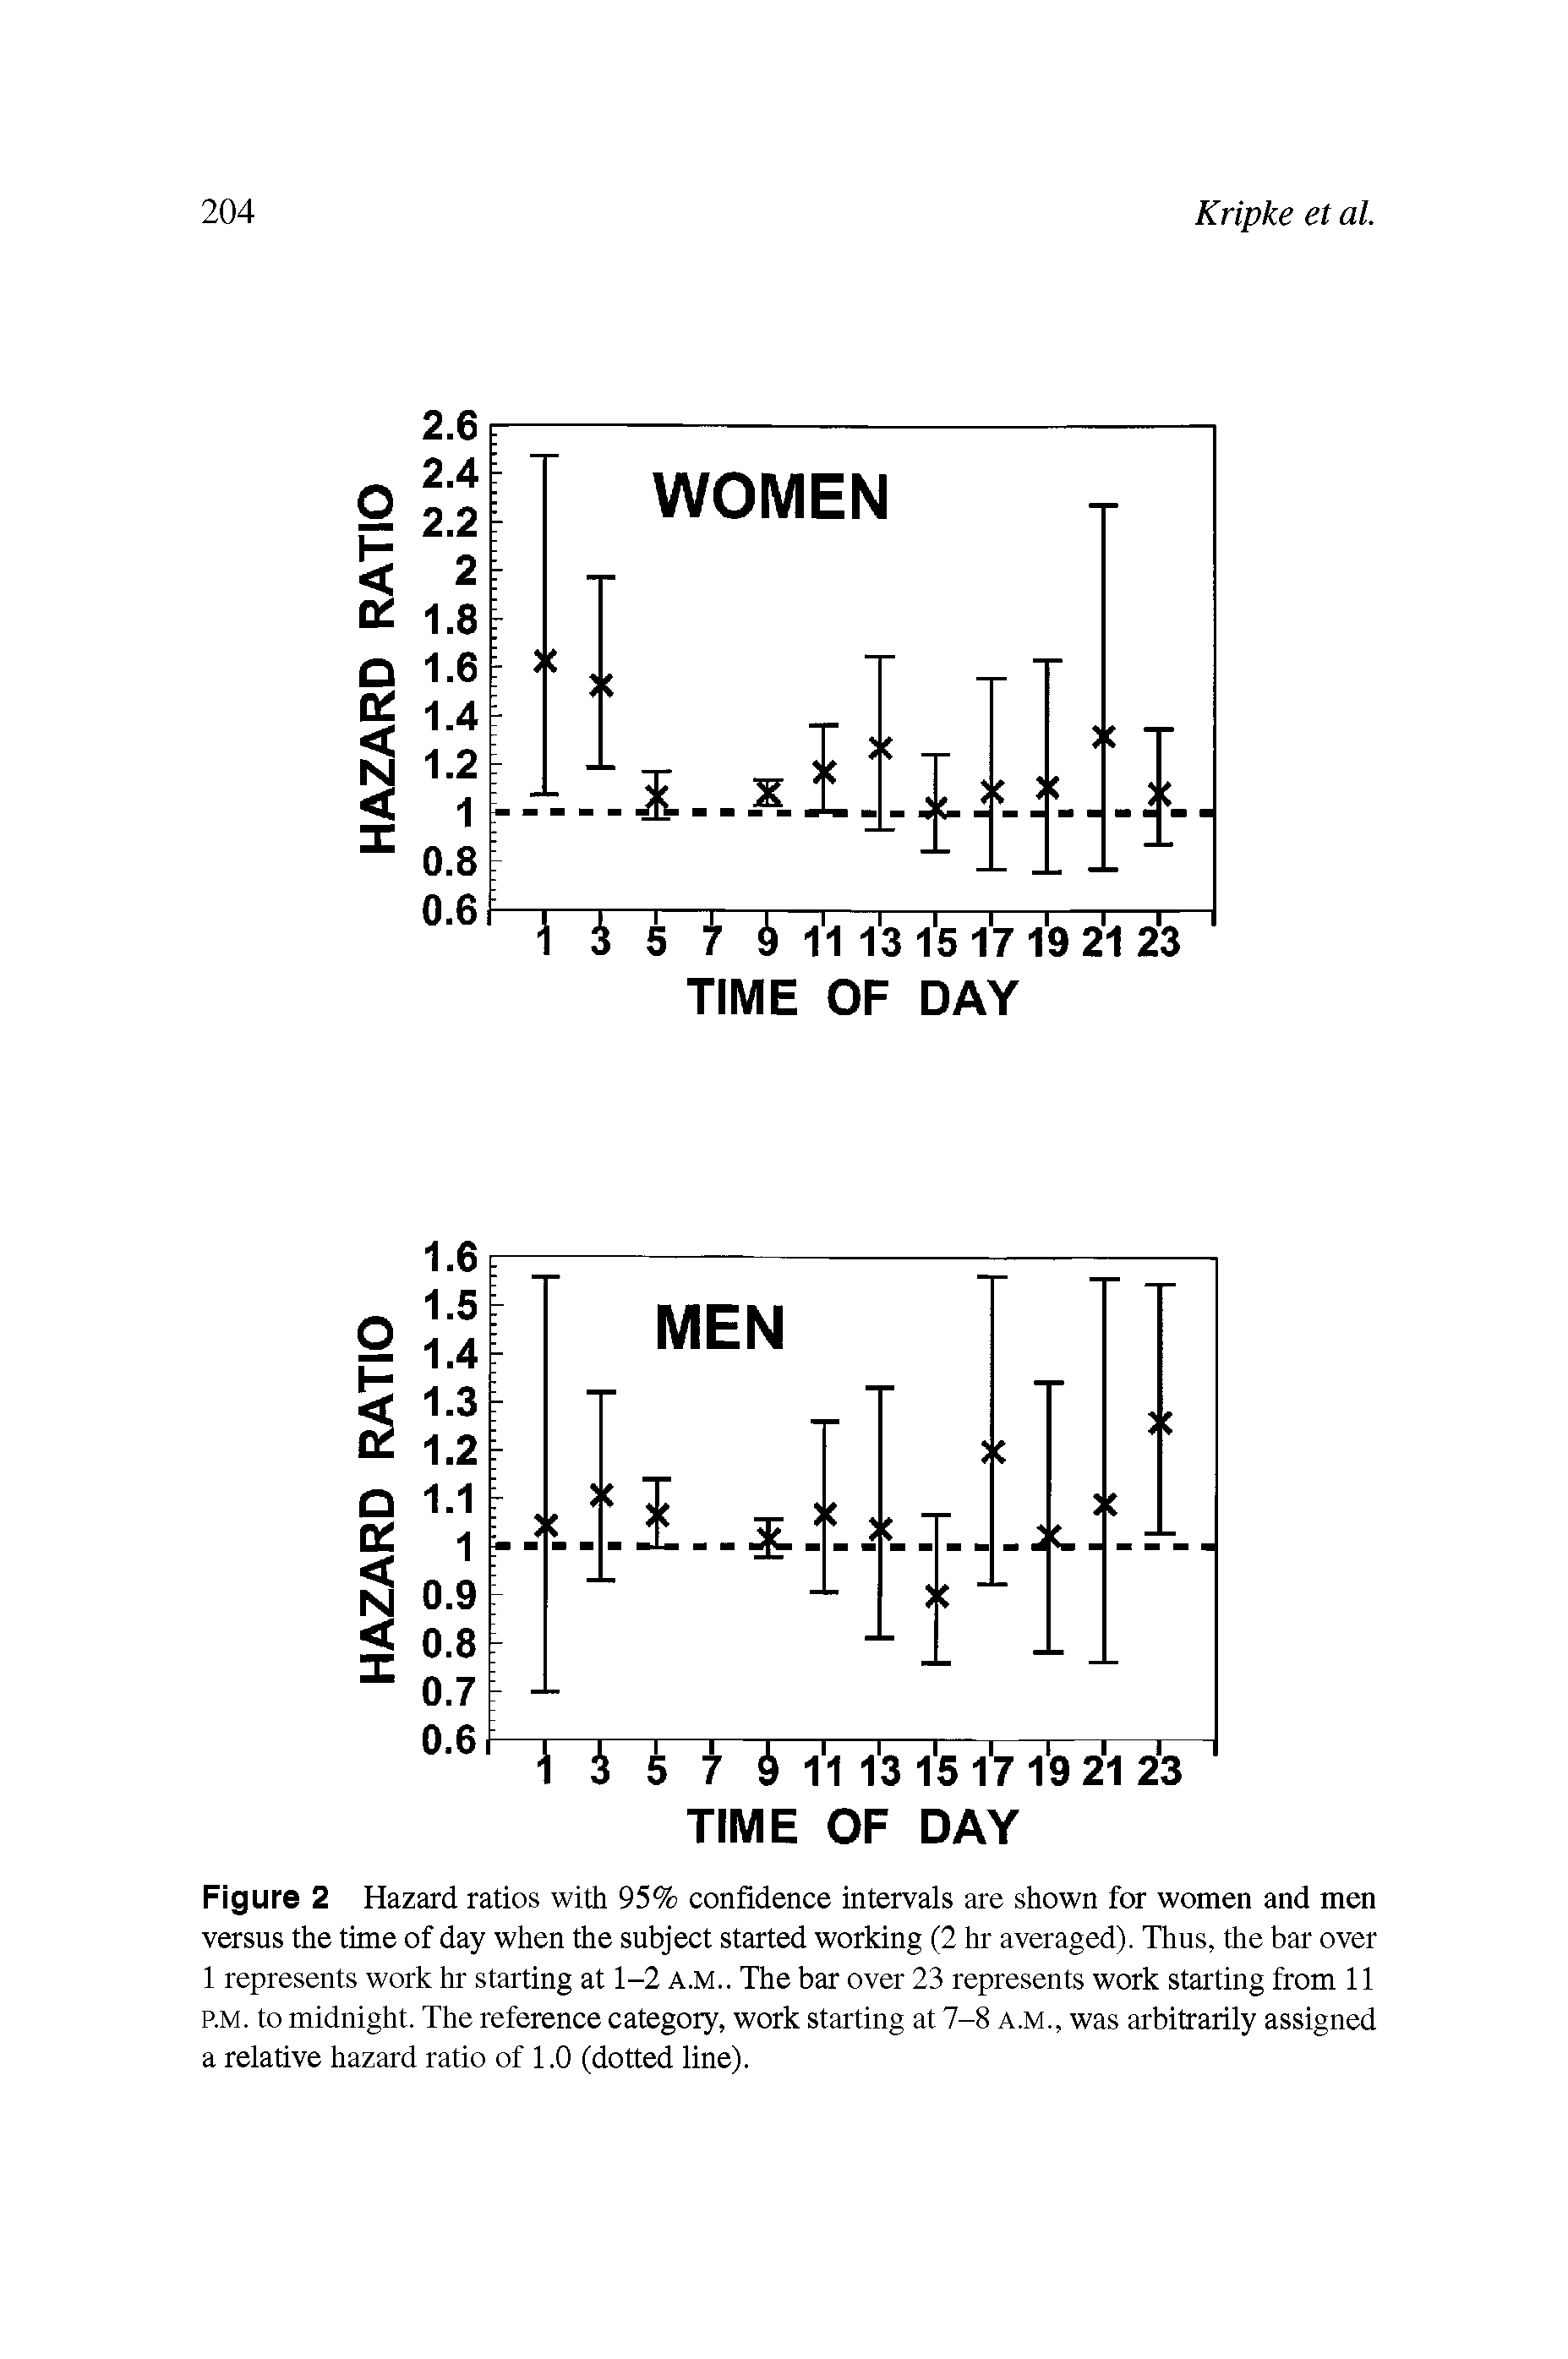 Figure 2 Hazard ratios with 95% confidence intervals are shown for women and men versus the time of day when the subject started working (2 hr averaged). Thus, the bar over 1 represents work hr starting at 1-2 A.M.. The bar over 23 represents work starting from 11 p.M. to midnight. The reference category, work starting at 7-8 A.M., was arbitrarily assigned a relative hazard ratio of 1.0 (dotted line).